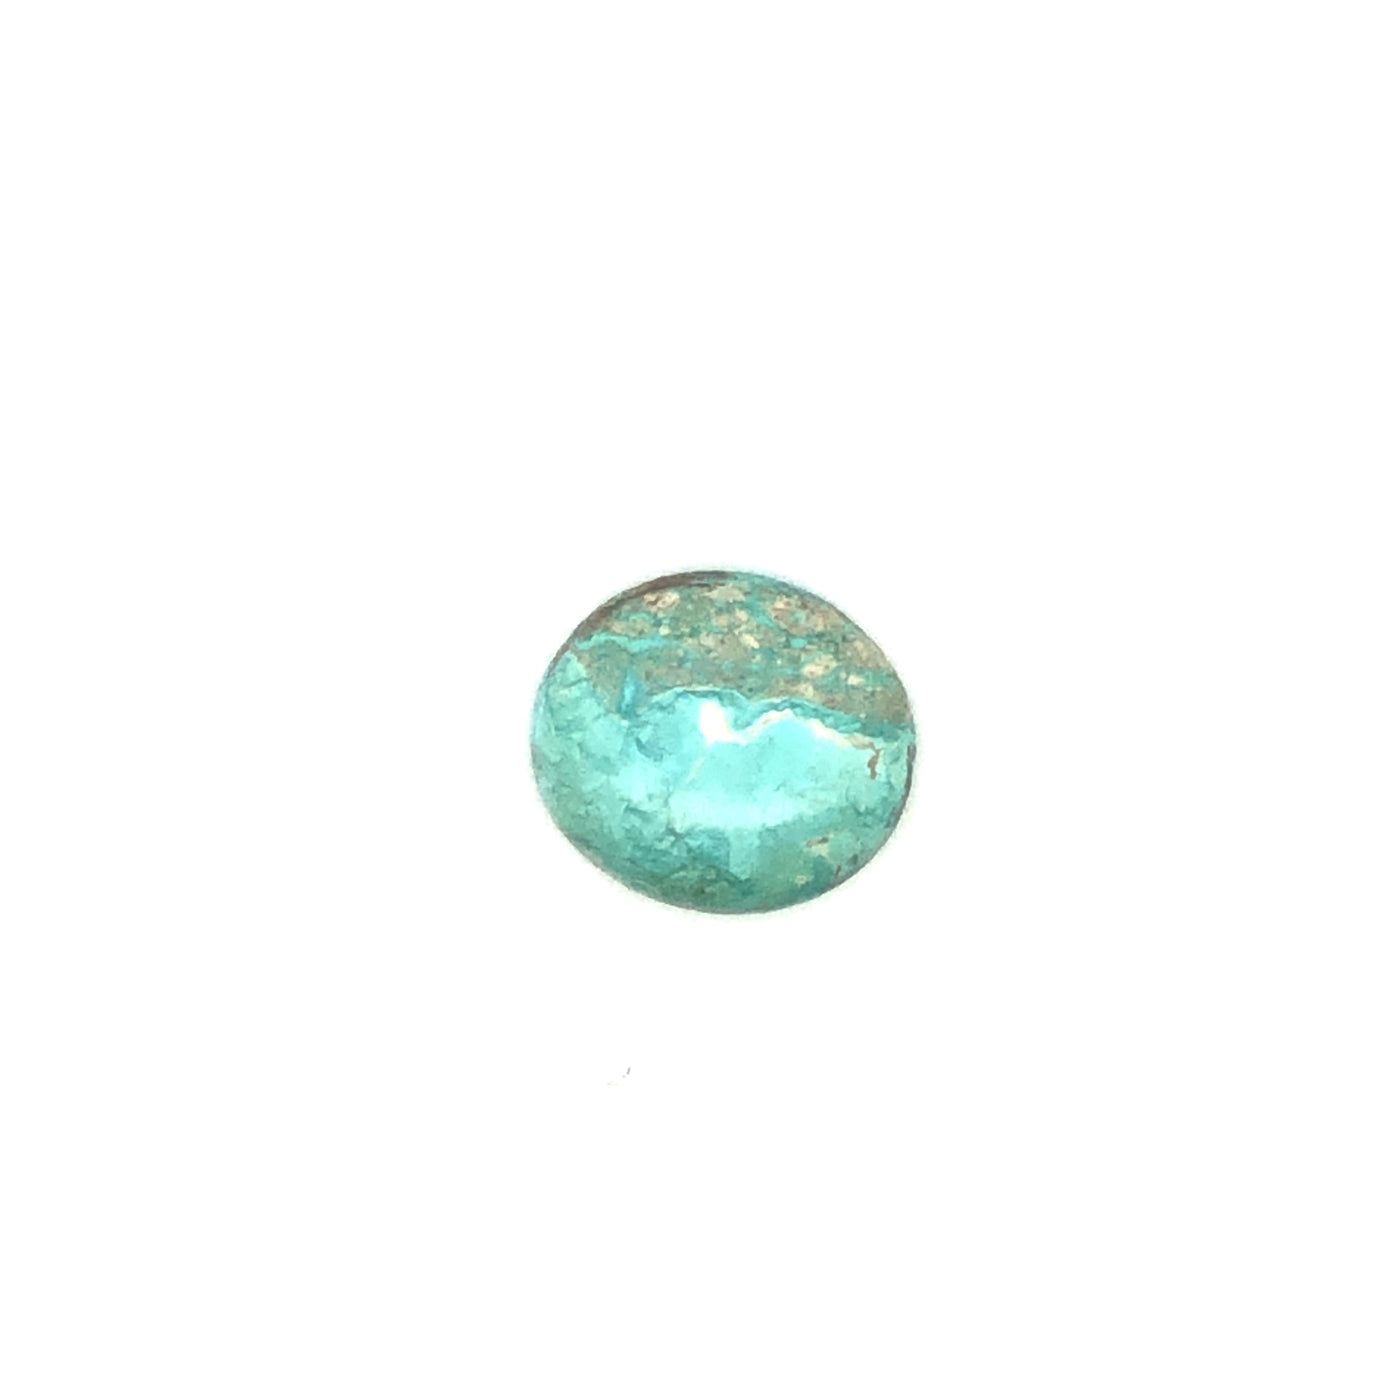 Loose Narooma Turquoise Oval Shaped 9.27Ct Blue With Some White